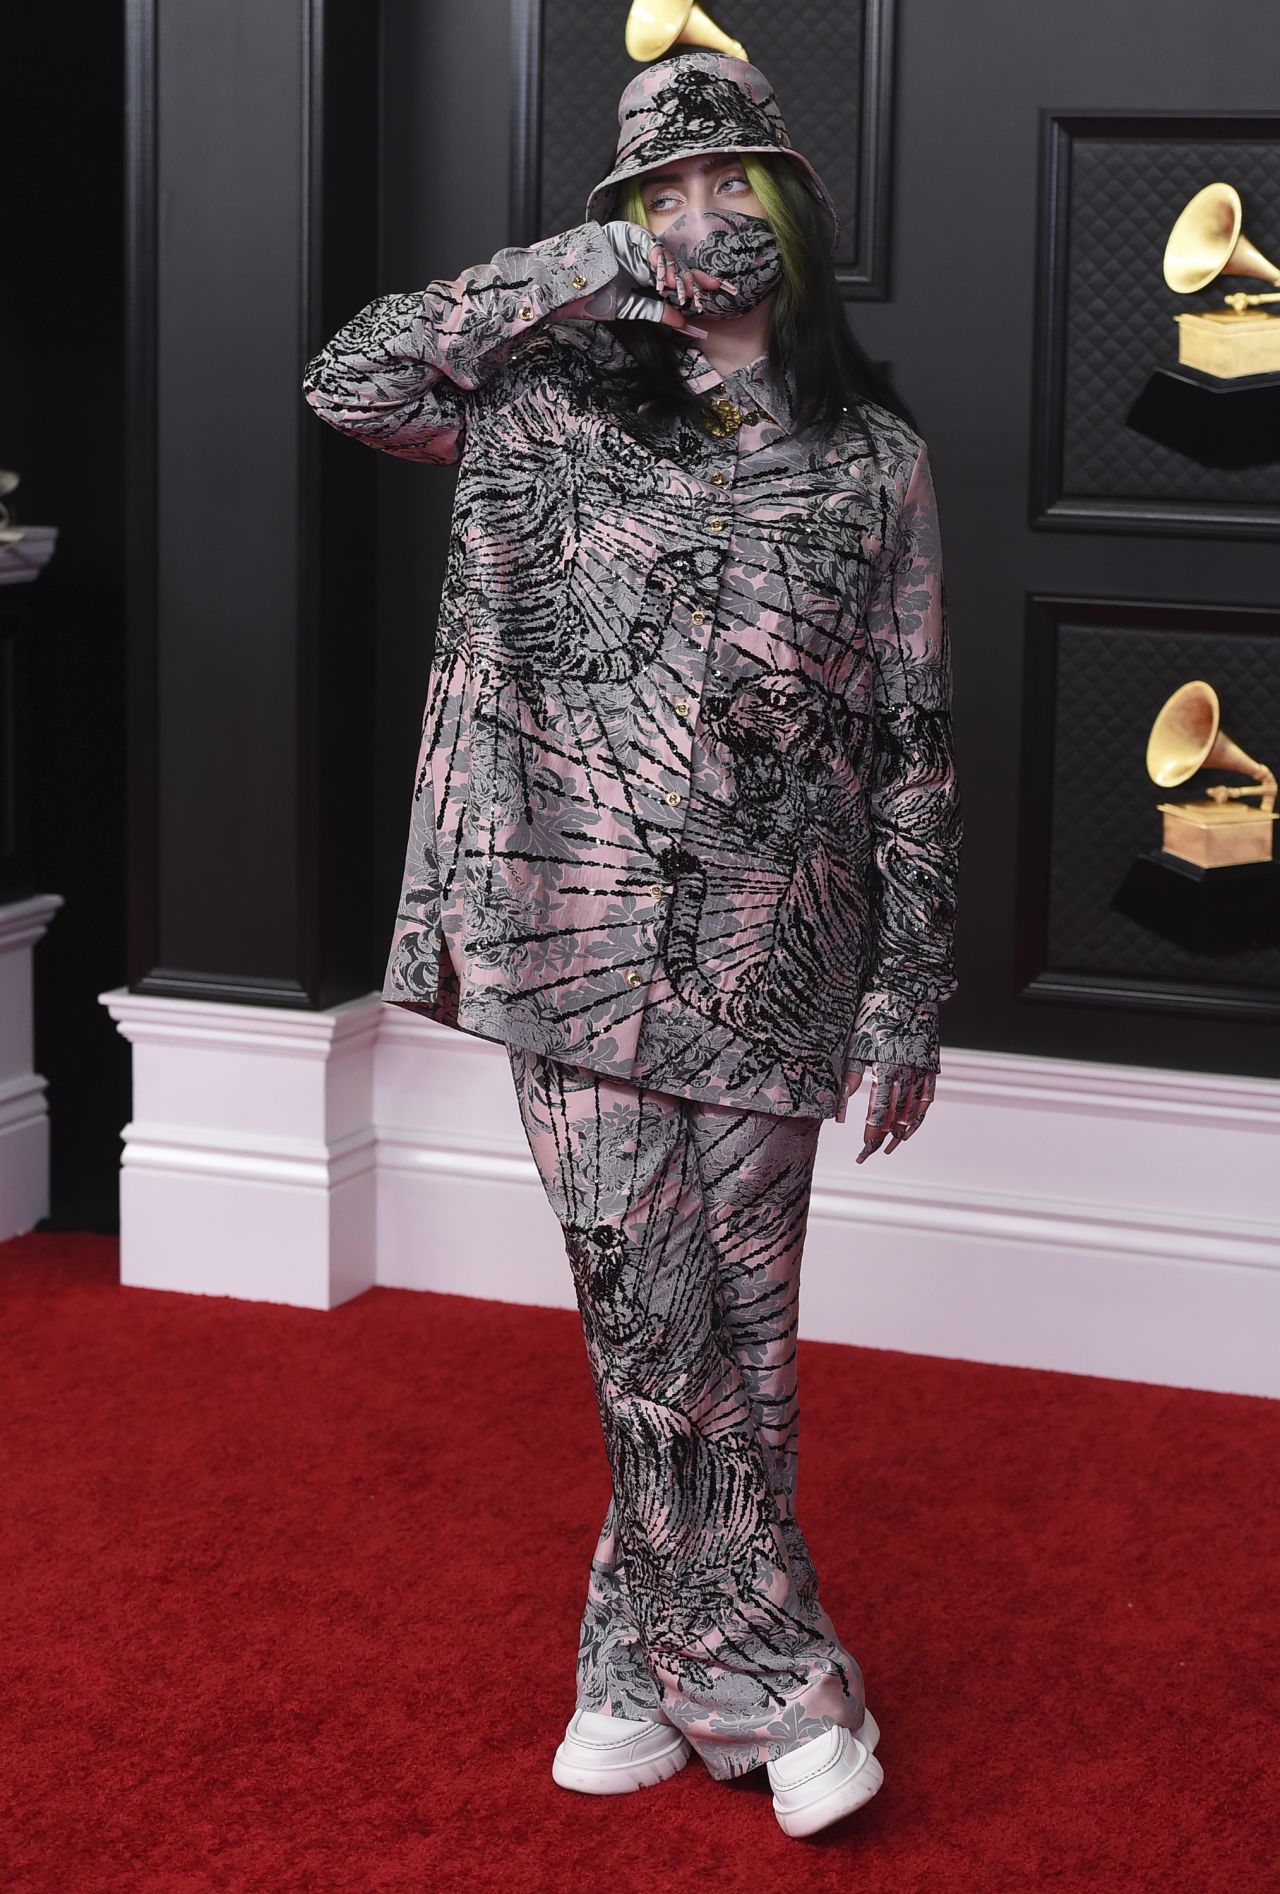 Billie Eilish arrives at the 63rd annual Grammy Awards in Gucci.